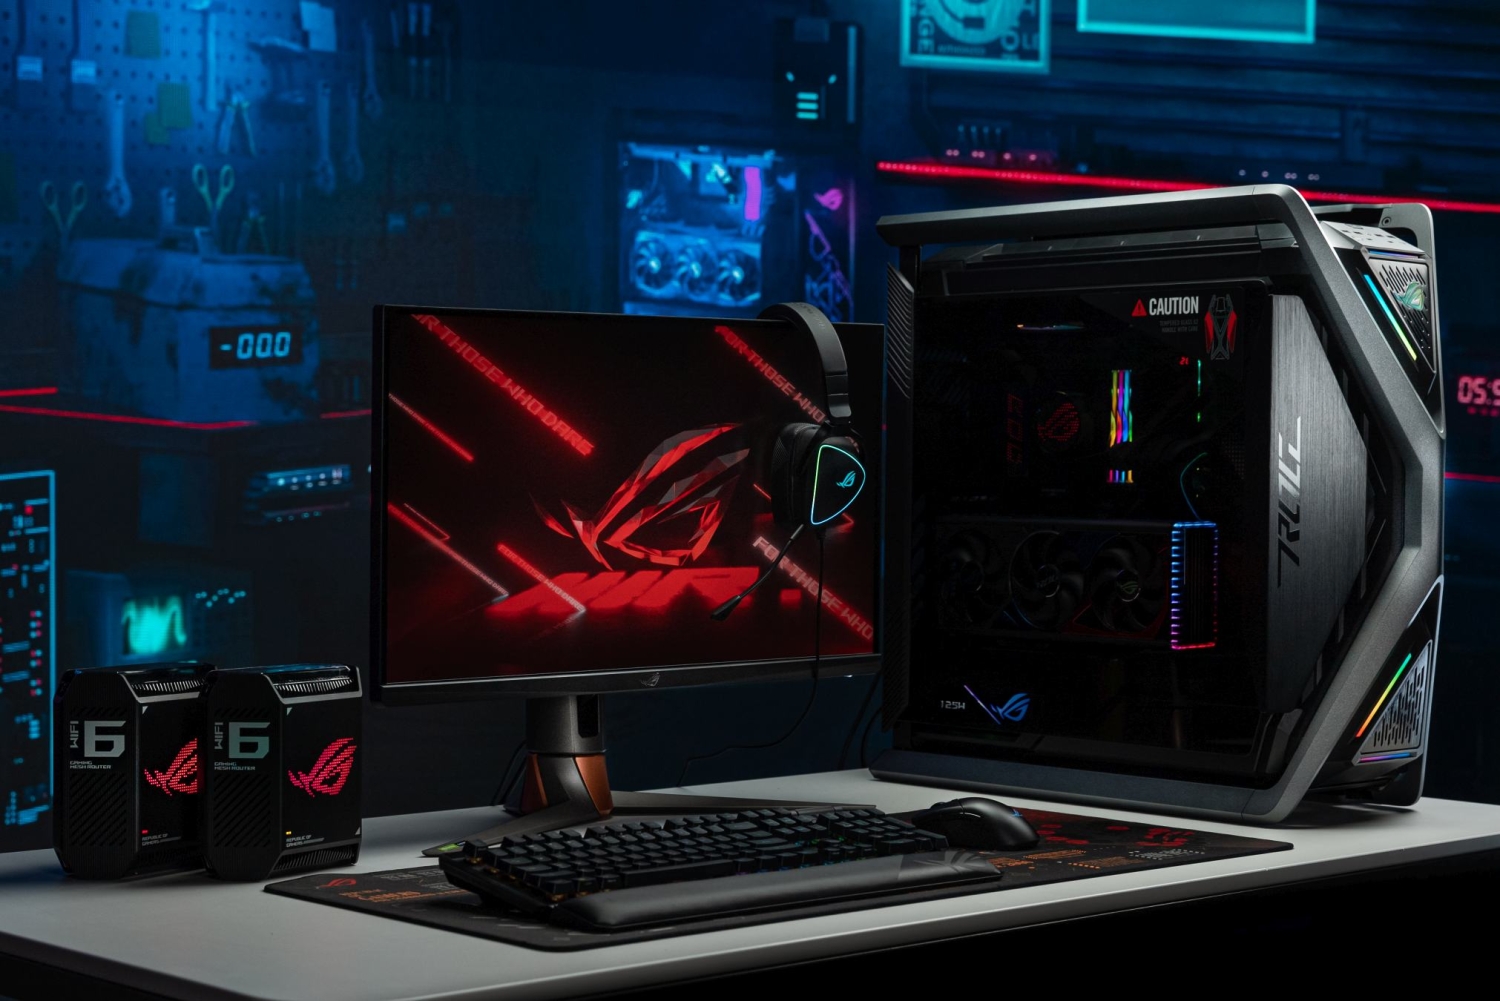 ASUS's new ROG Hyperion GR701 full-tower gaming case looks pretty